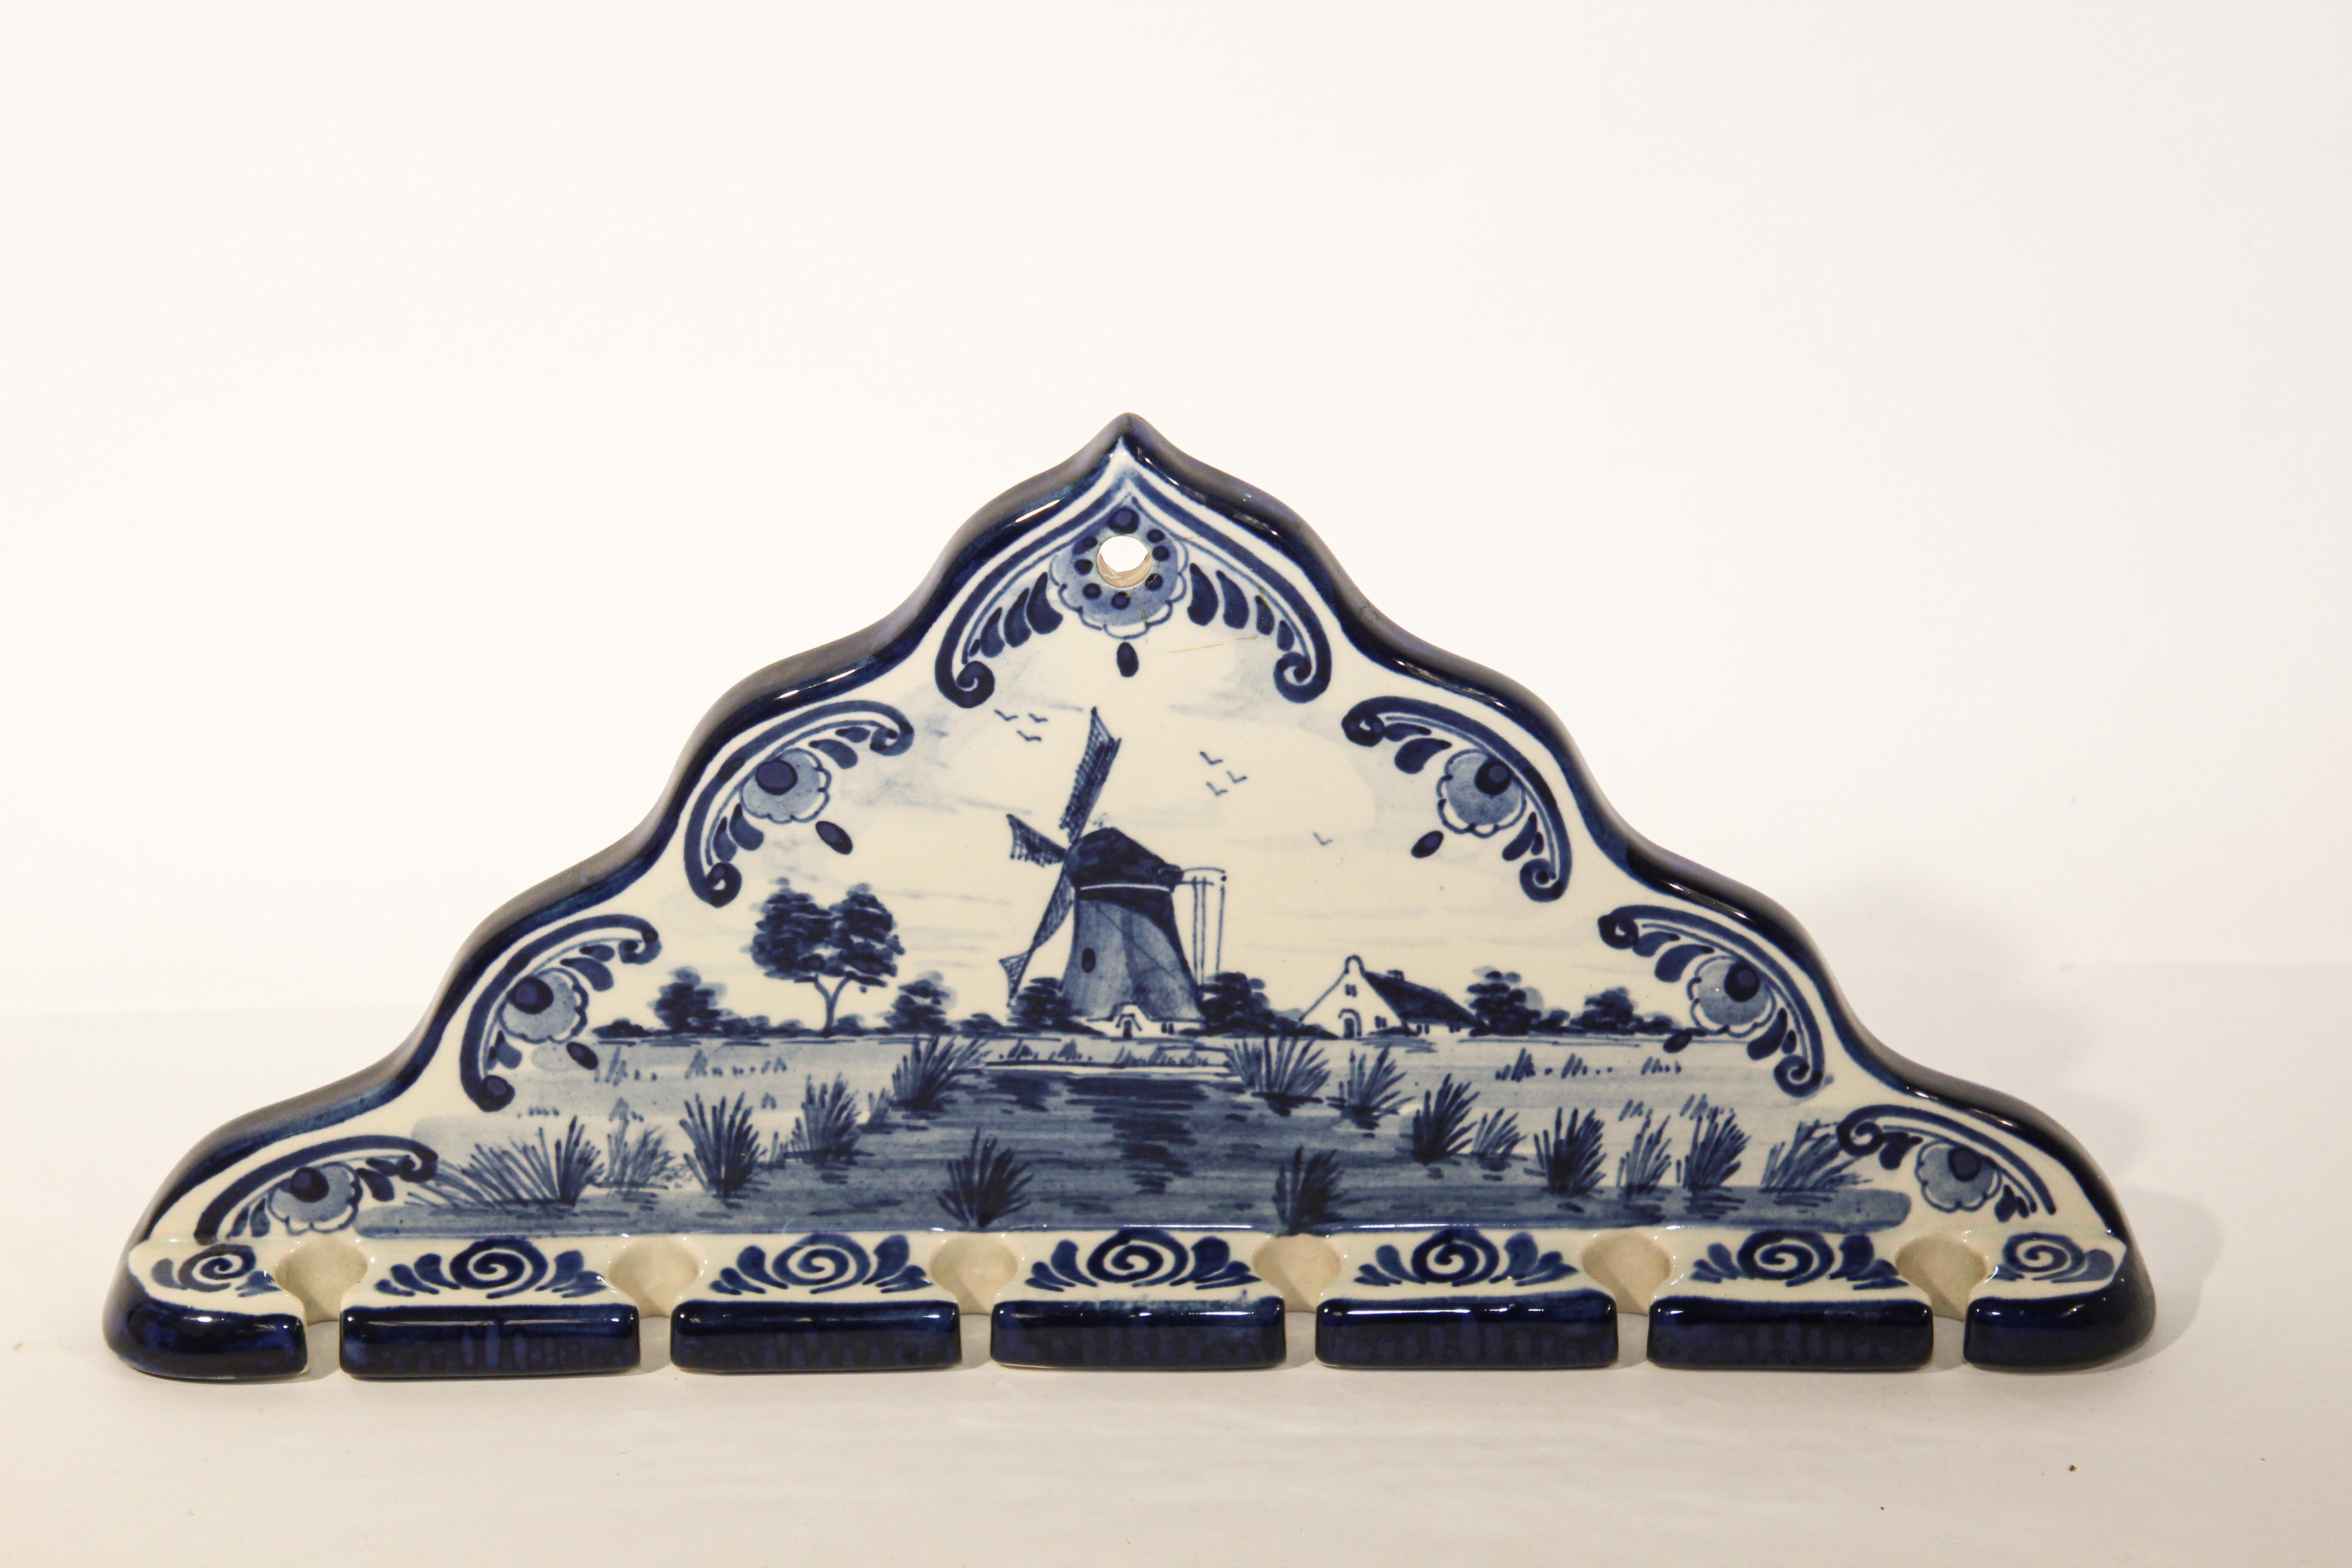 Stunning Vintage Delfts Blauw blue and white porcelain spoon rack in very good condition.
Beautiful Dutch Delft hanging wall rack with blue and white hand painted houses and traditional windmill in Holland.
Great item to add to your Delft